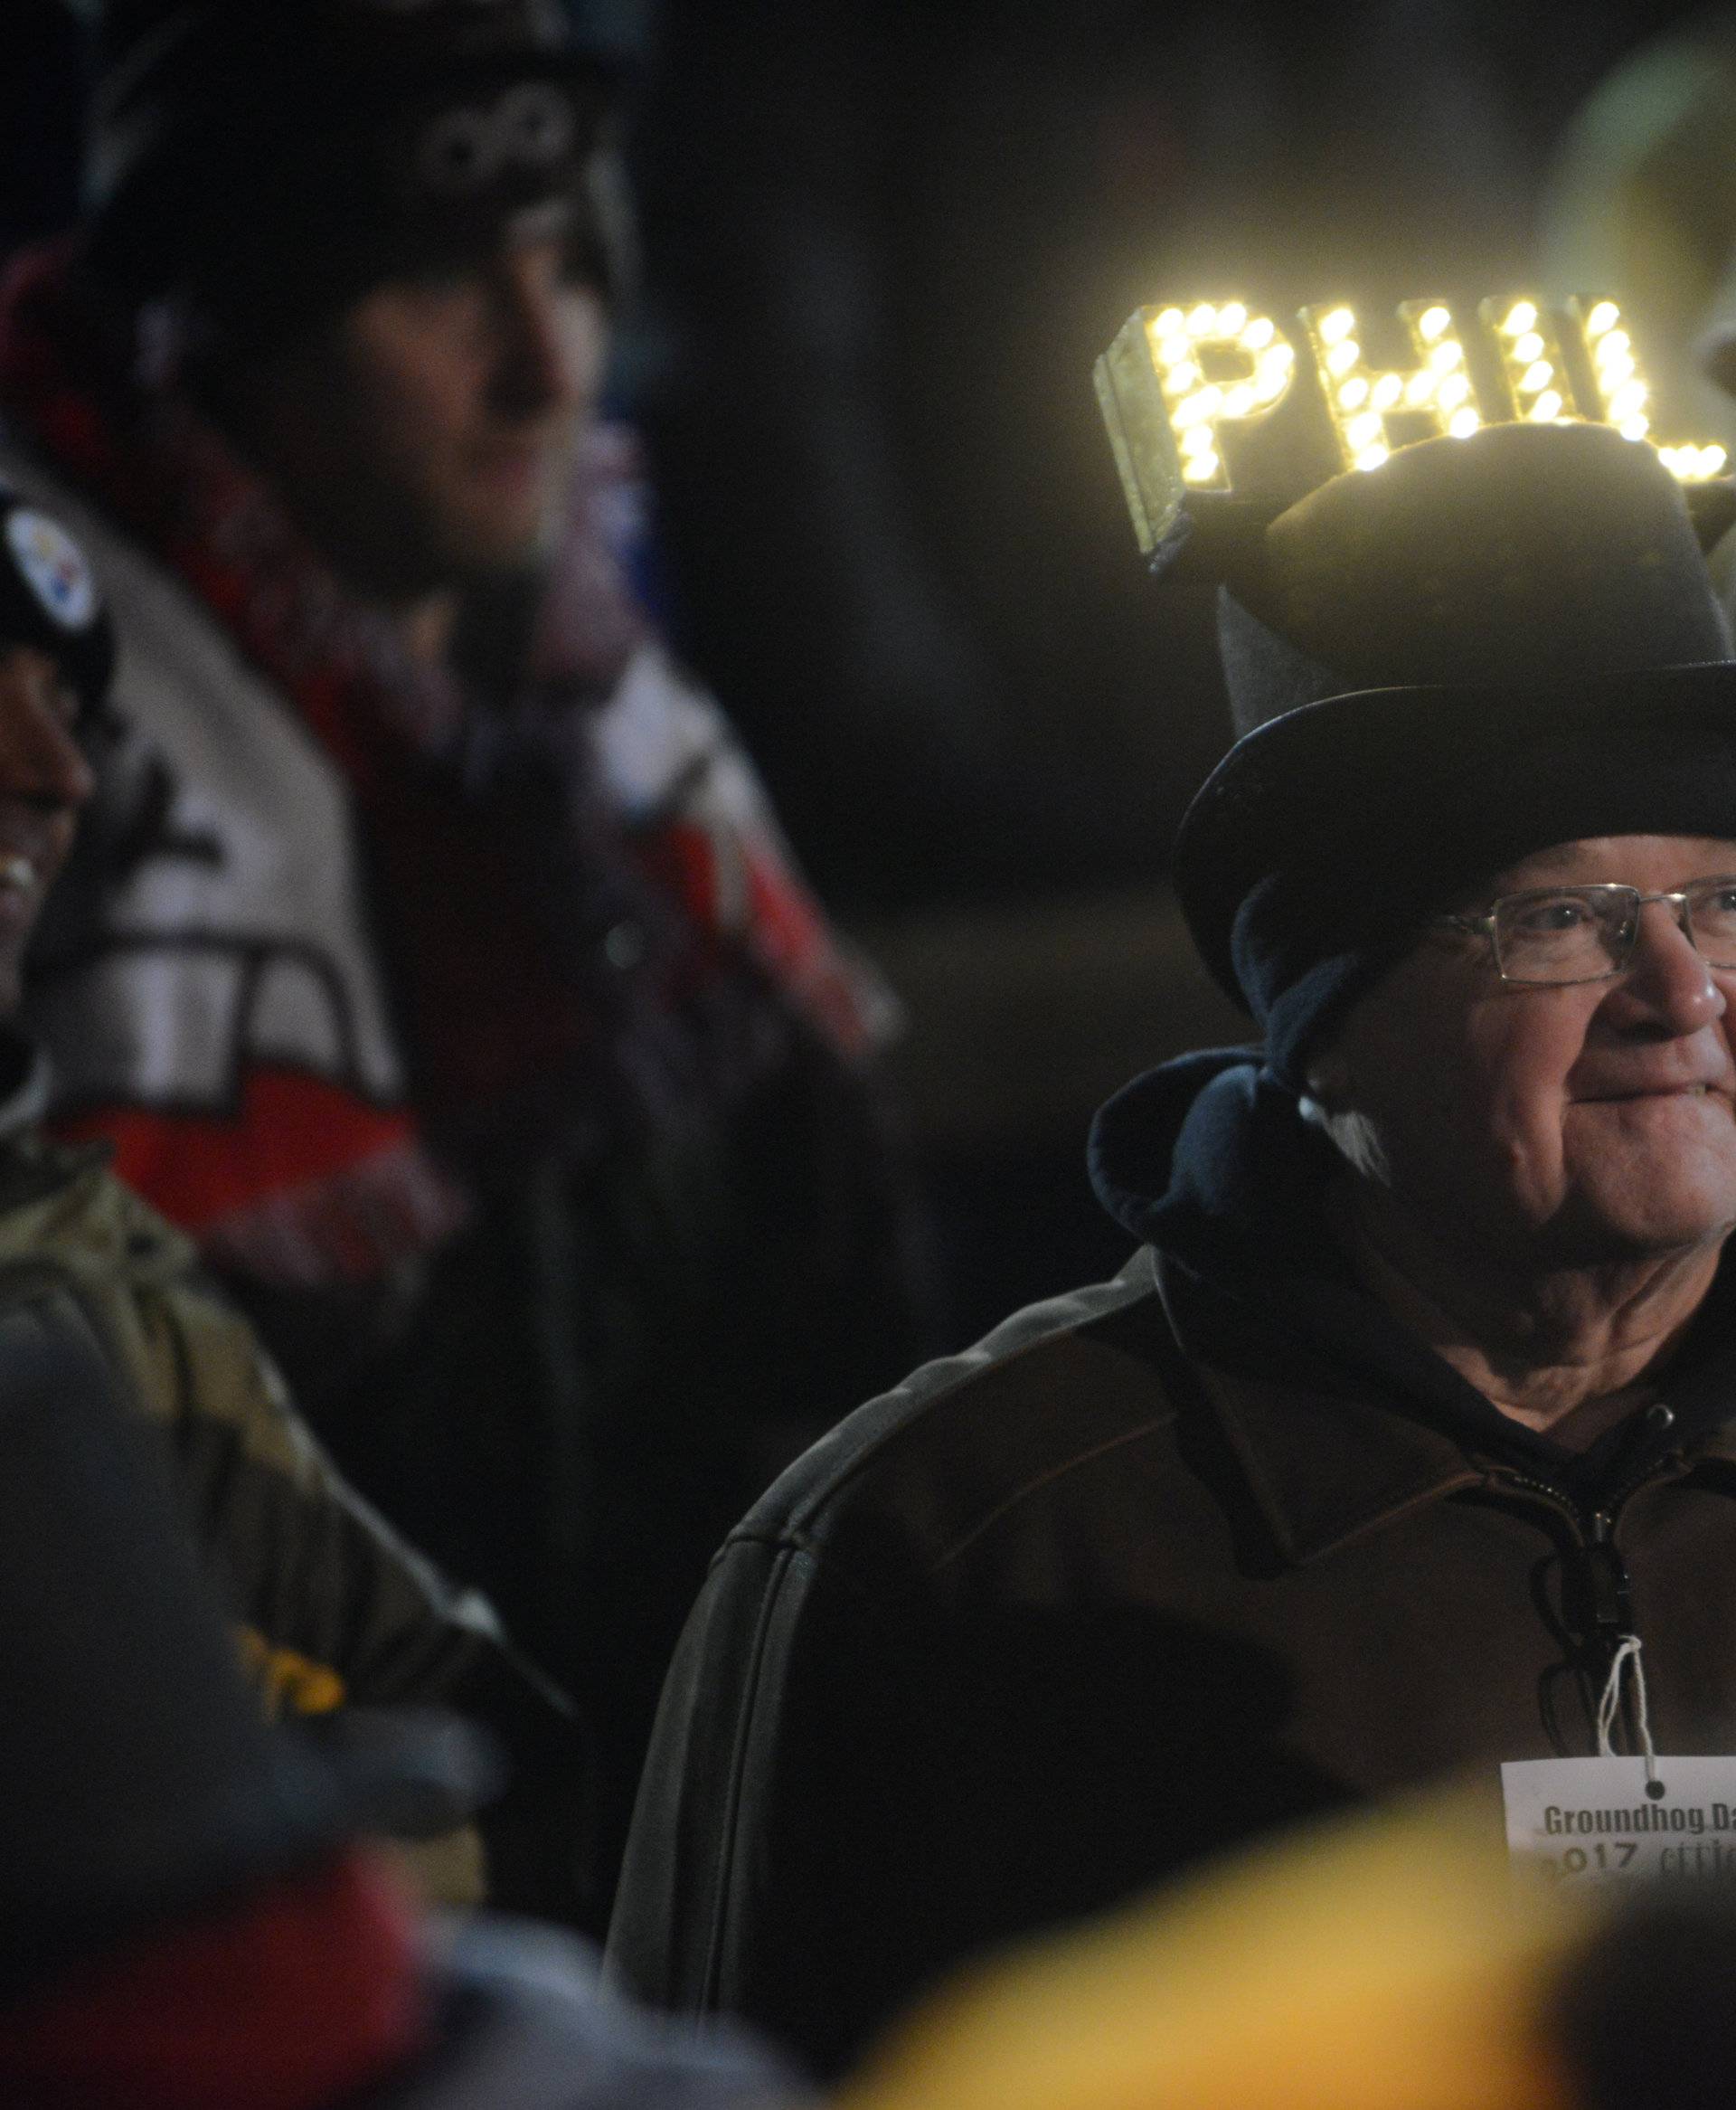 Barry Edwards of Lancaster, PA, wears a lighted hat on Groundhog Day in Punxsutawney